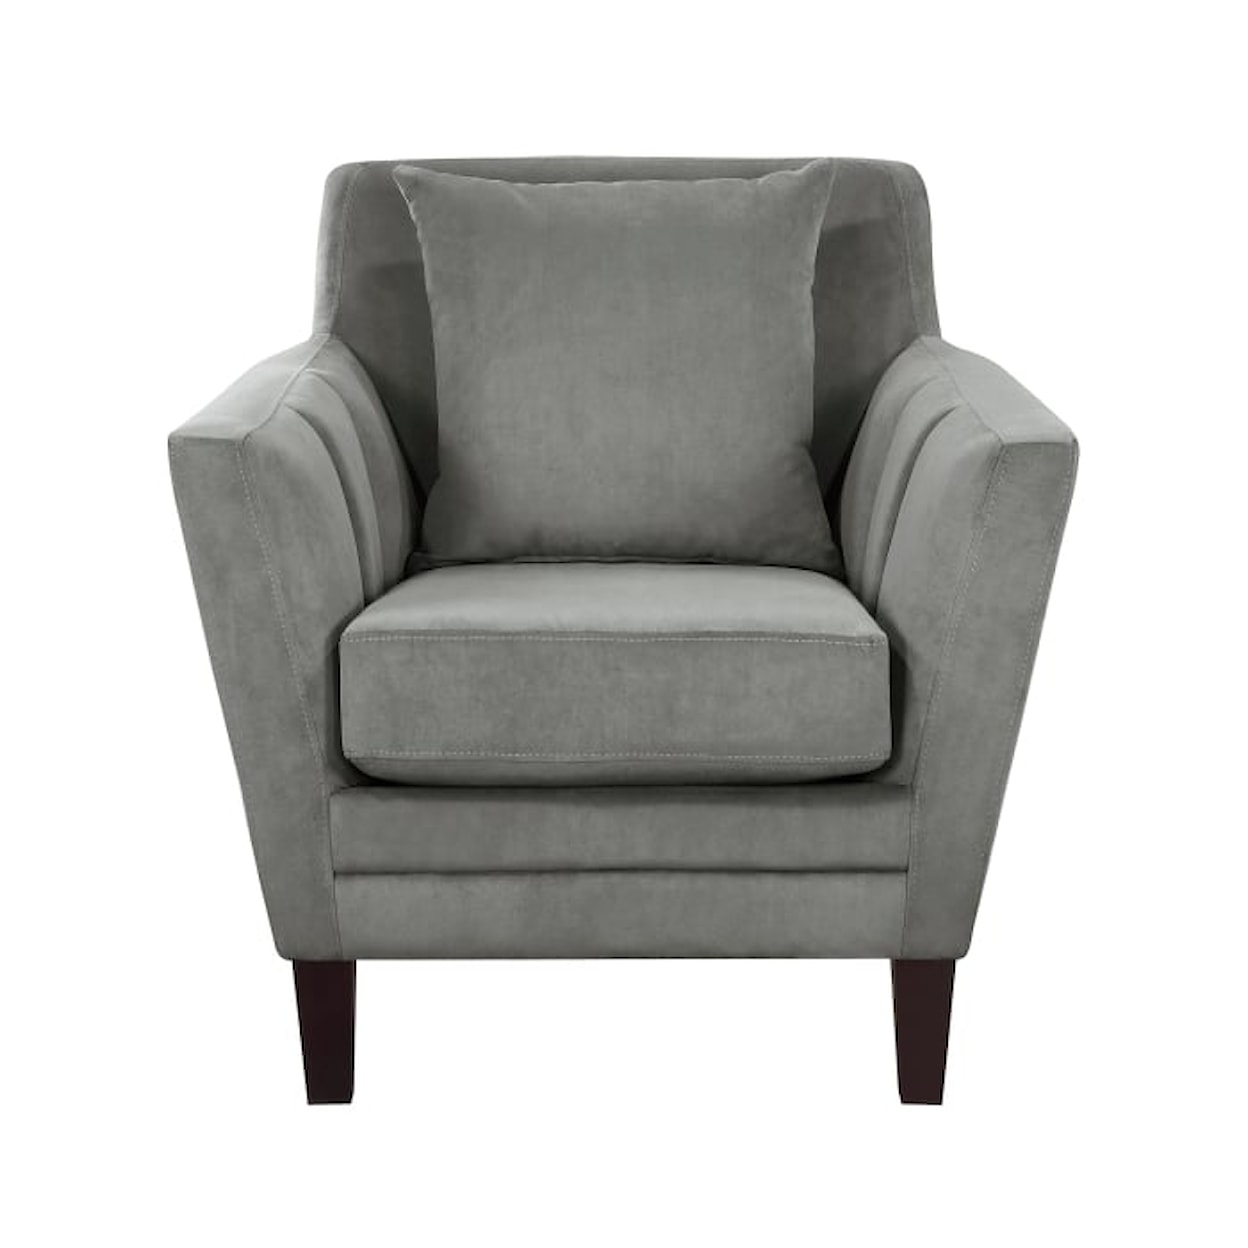 Homelegance Adore Accent Chair